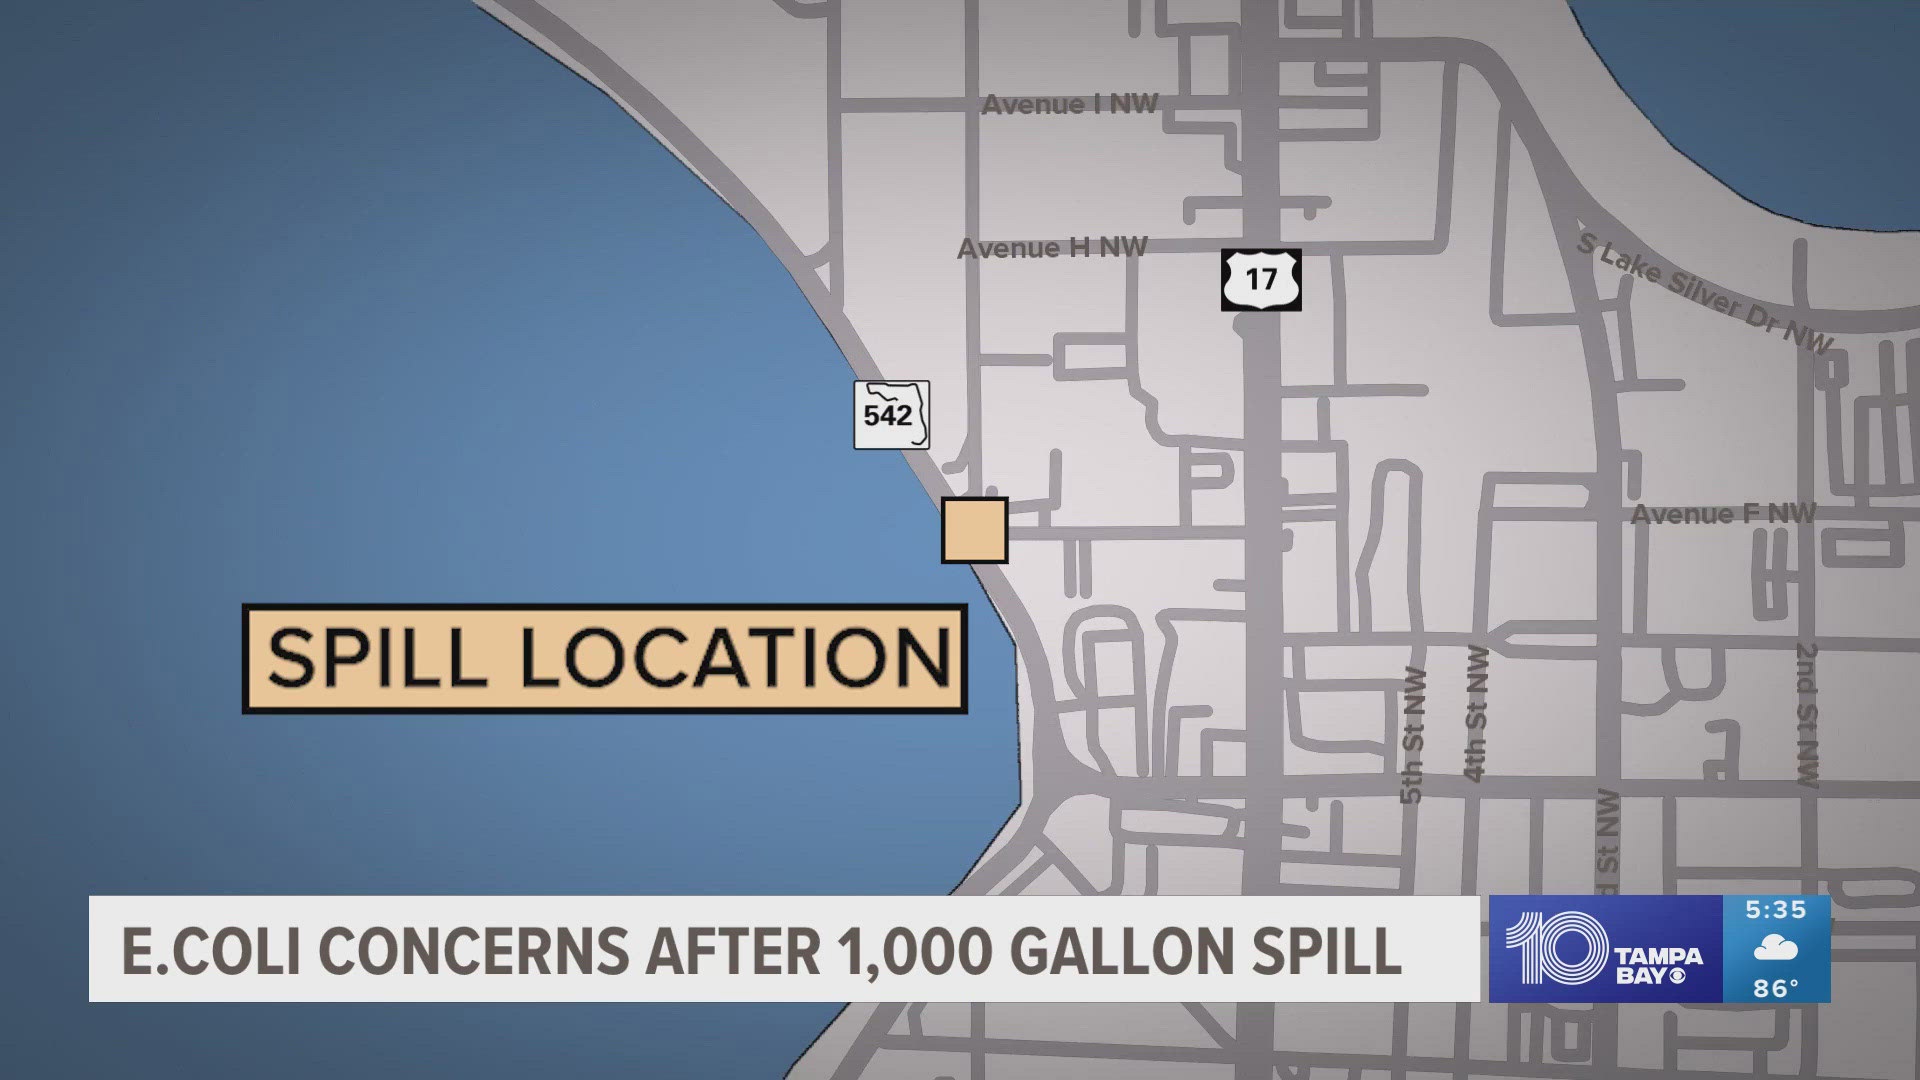 The 1,000-gallon spill led directly to Lake Howard, caused by a backup of grease from manholes.